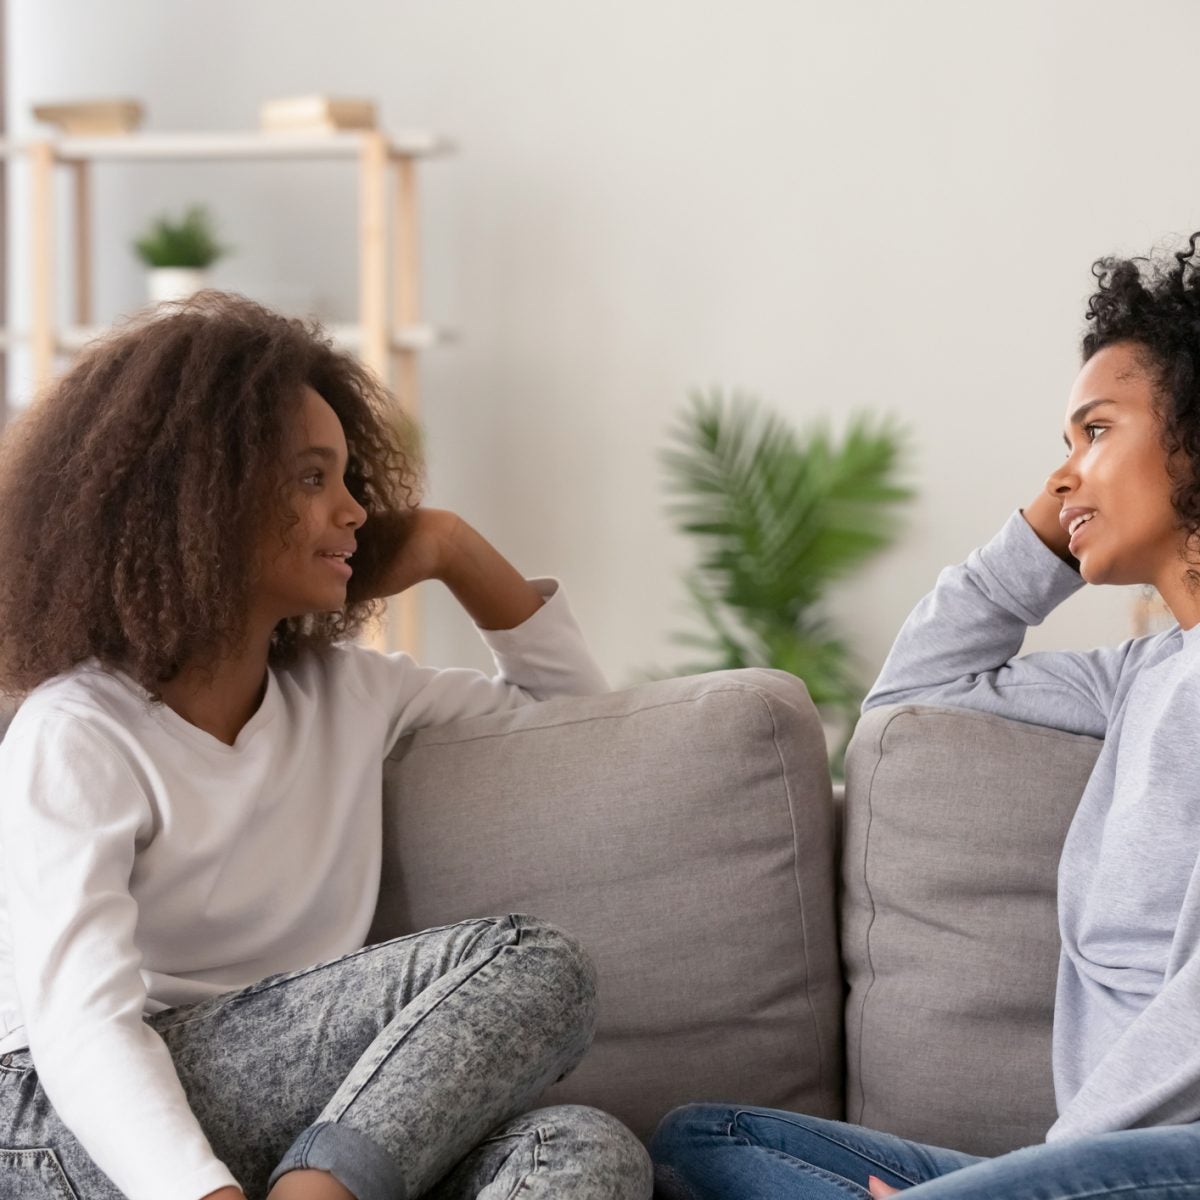 Is Codependency Ruining Your Friendships? Here's How You Can Tell